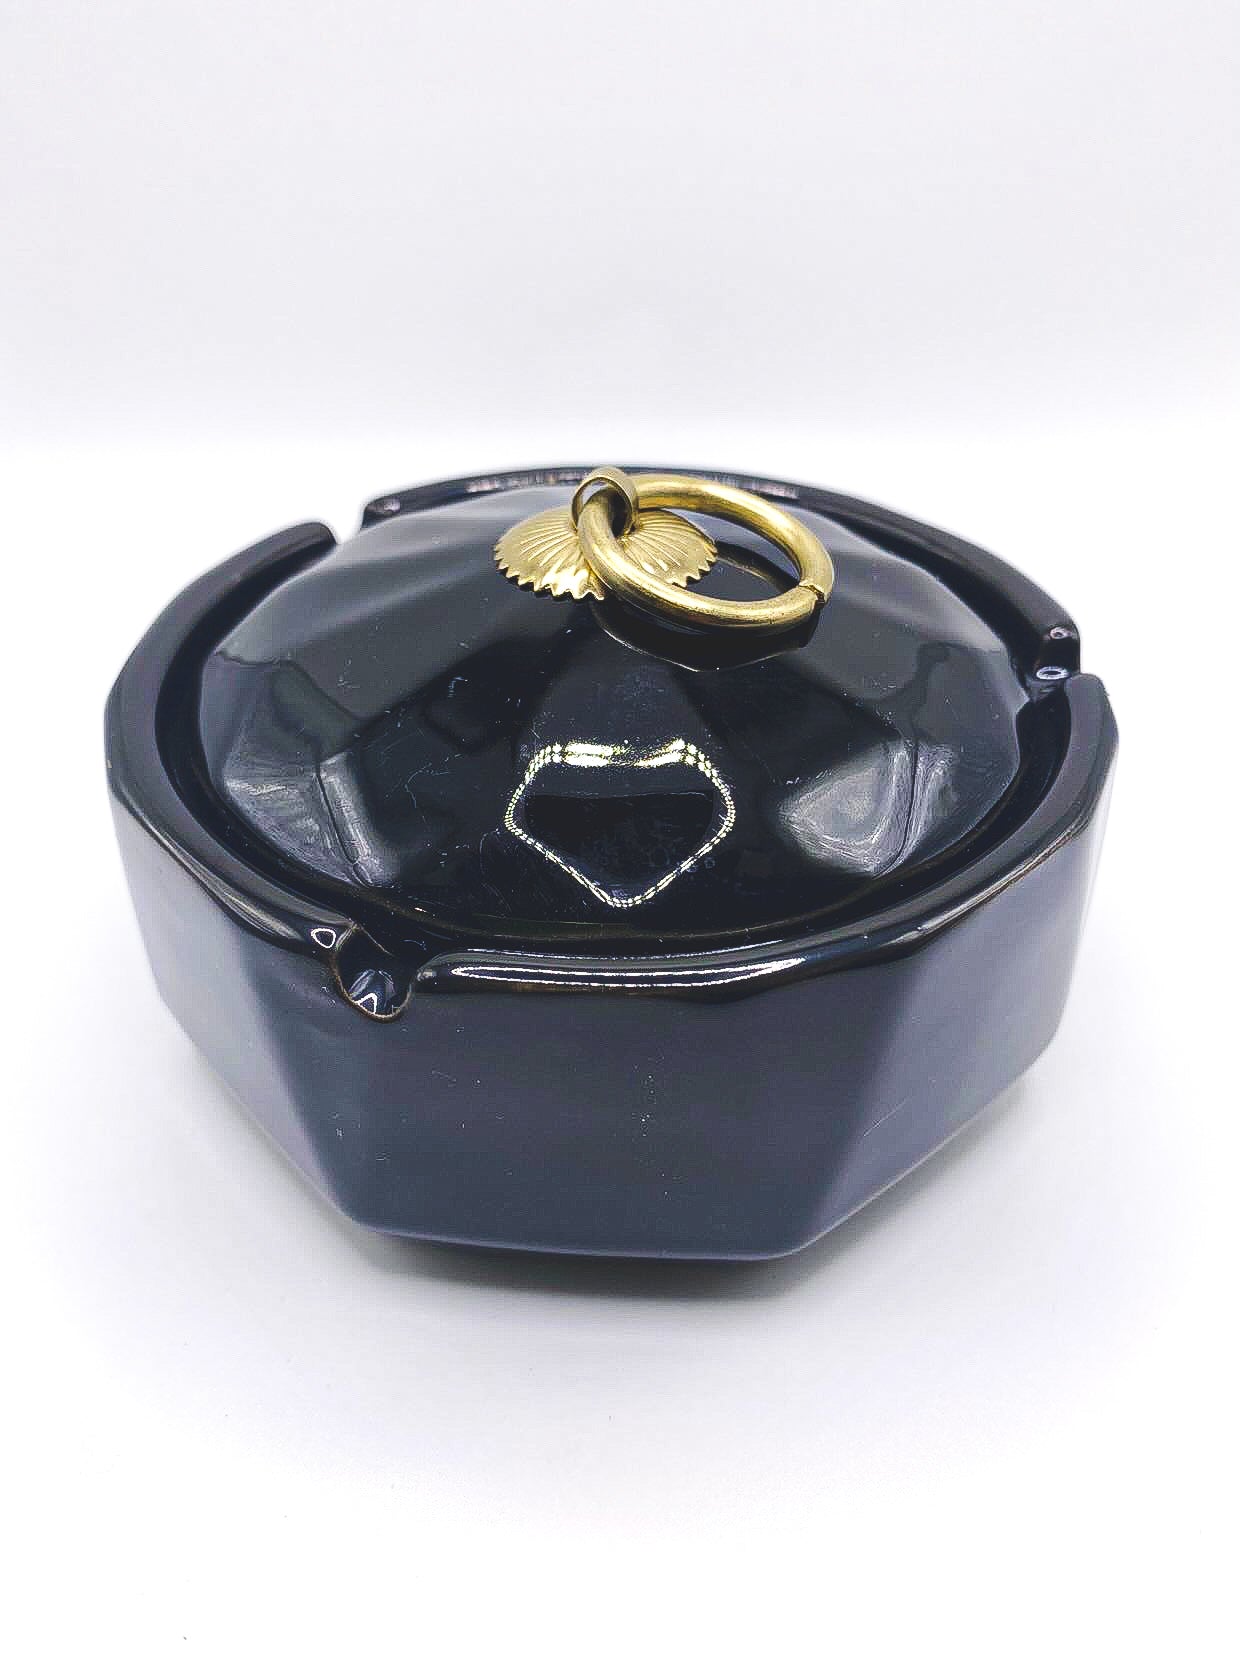  moisture Ash Tray sSet Purple Clay Ceramic Ashtray with Lid  Creative Hotel Supplies Office Bar Household Cigarette Tray (Color : B,  Size : Large) : Home & Kitchen